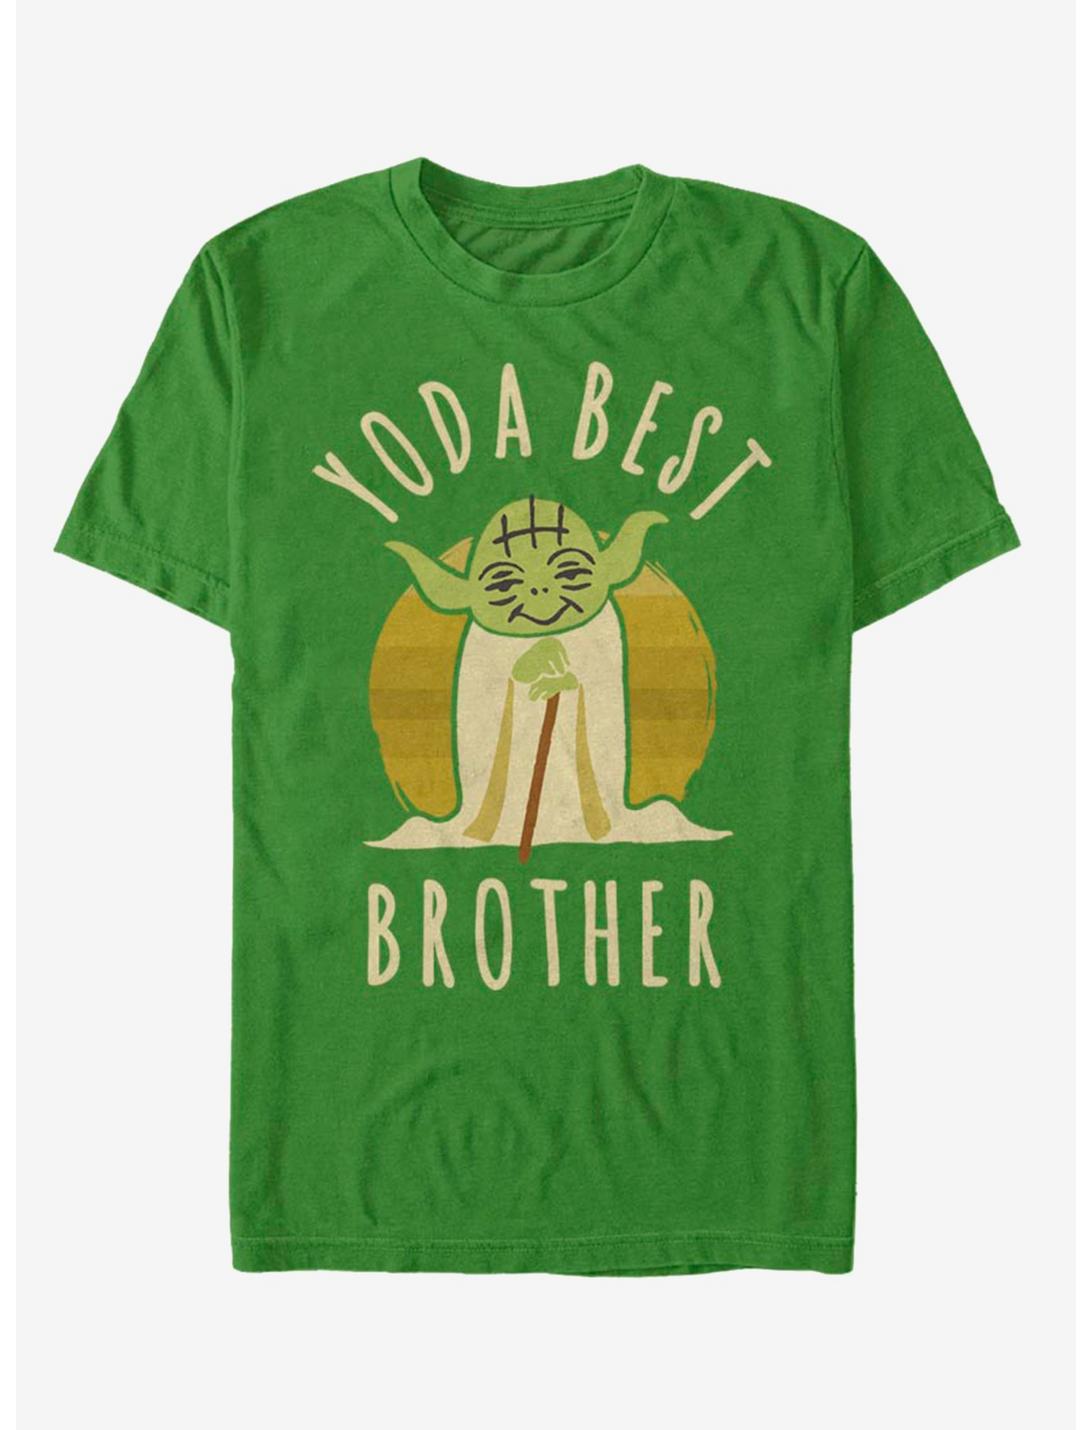 Star Wars Best Brother Yoda Says T-Shirt, KELLY, hi-res